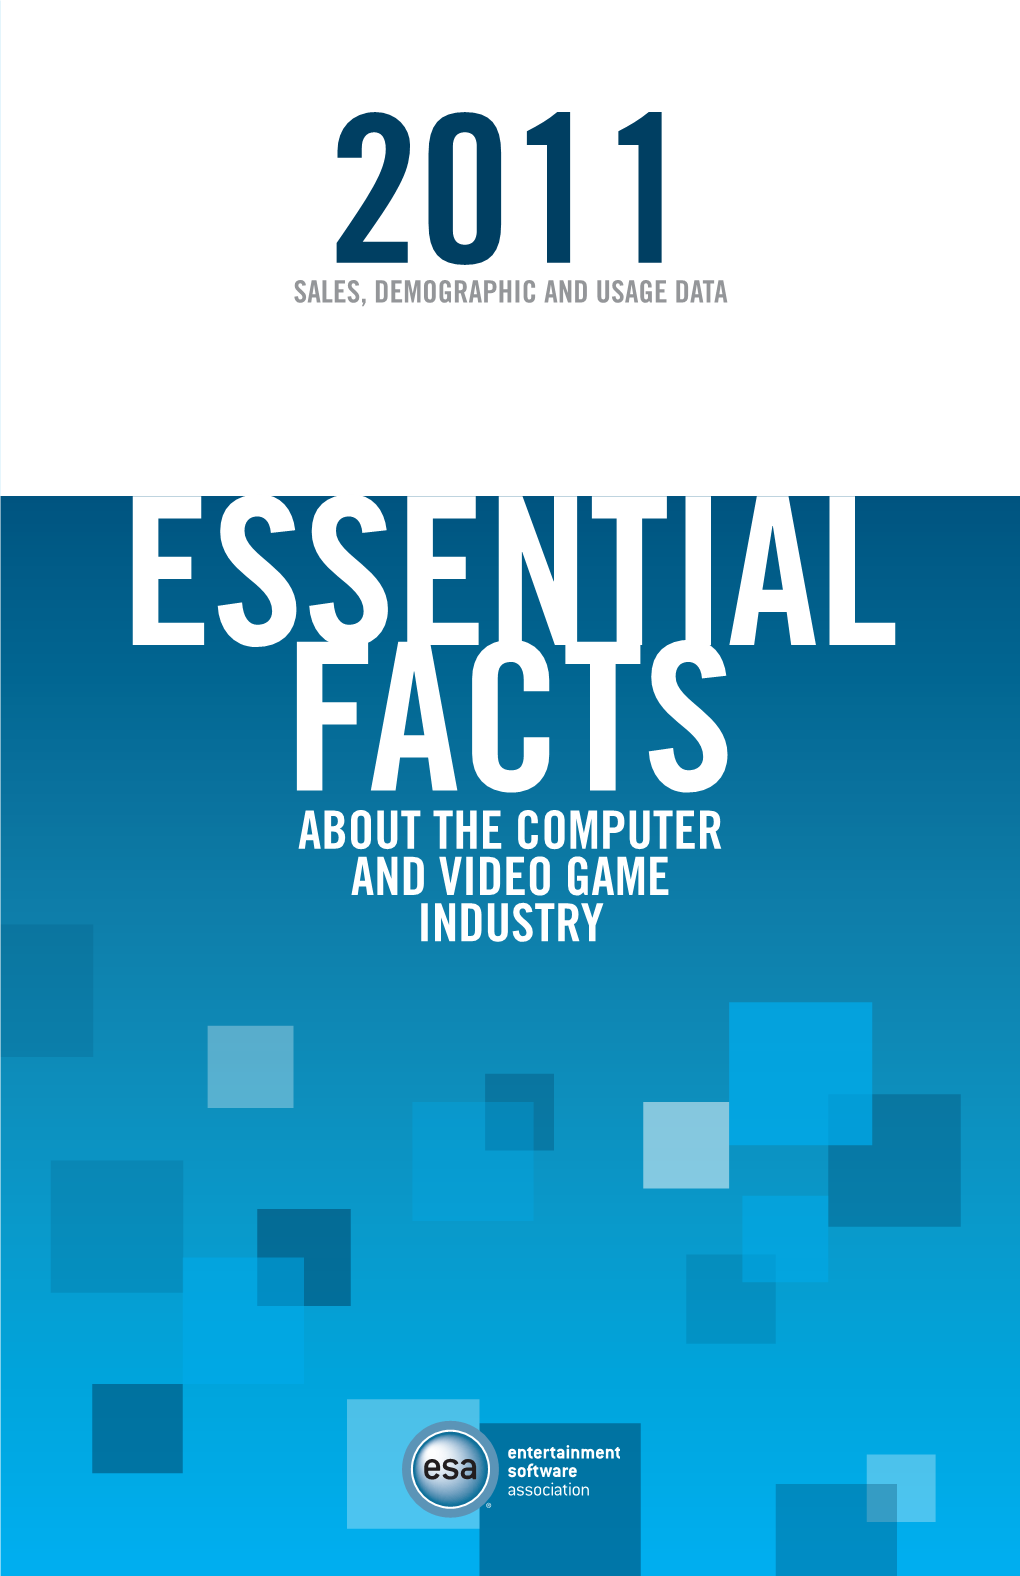 2011 Essential Facts About the Computer and Video Game Industry Was Released by the Entertainment Software Association (ESA) at E3 2011